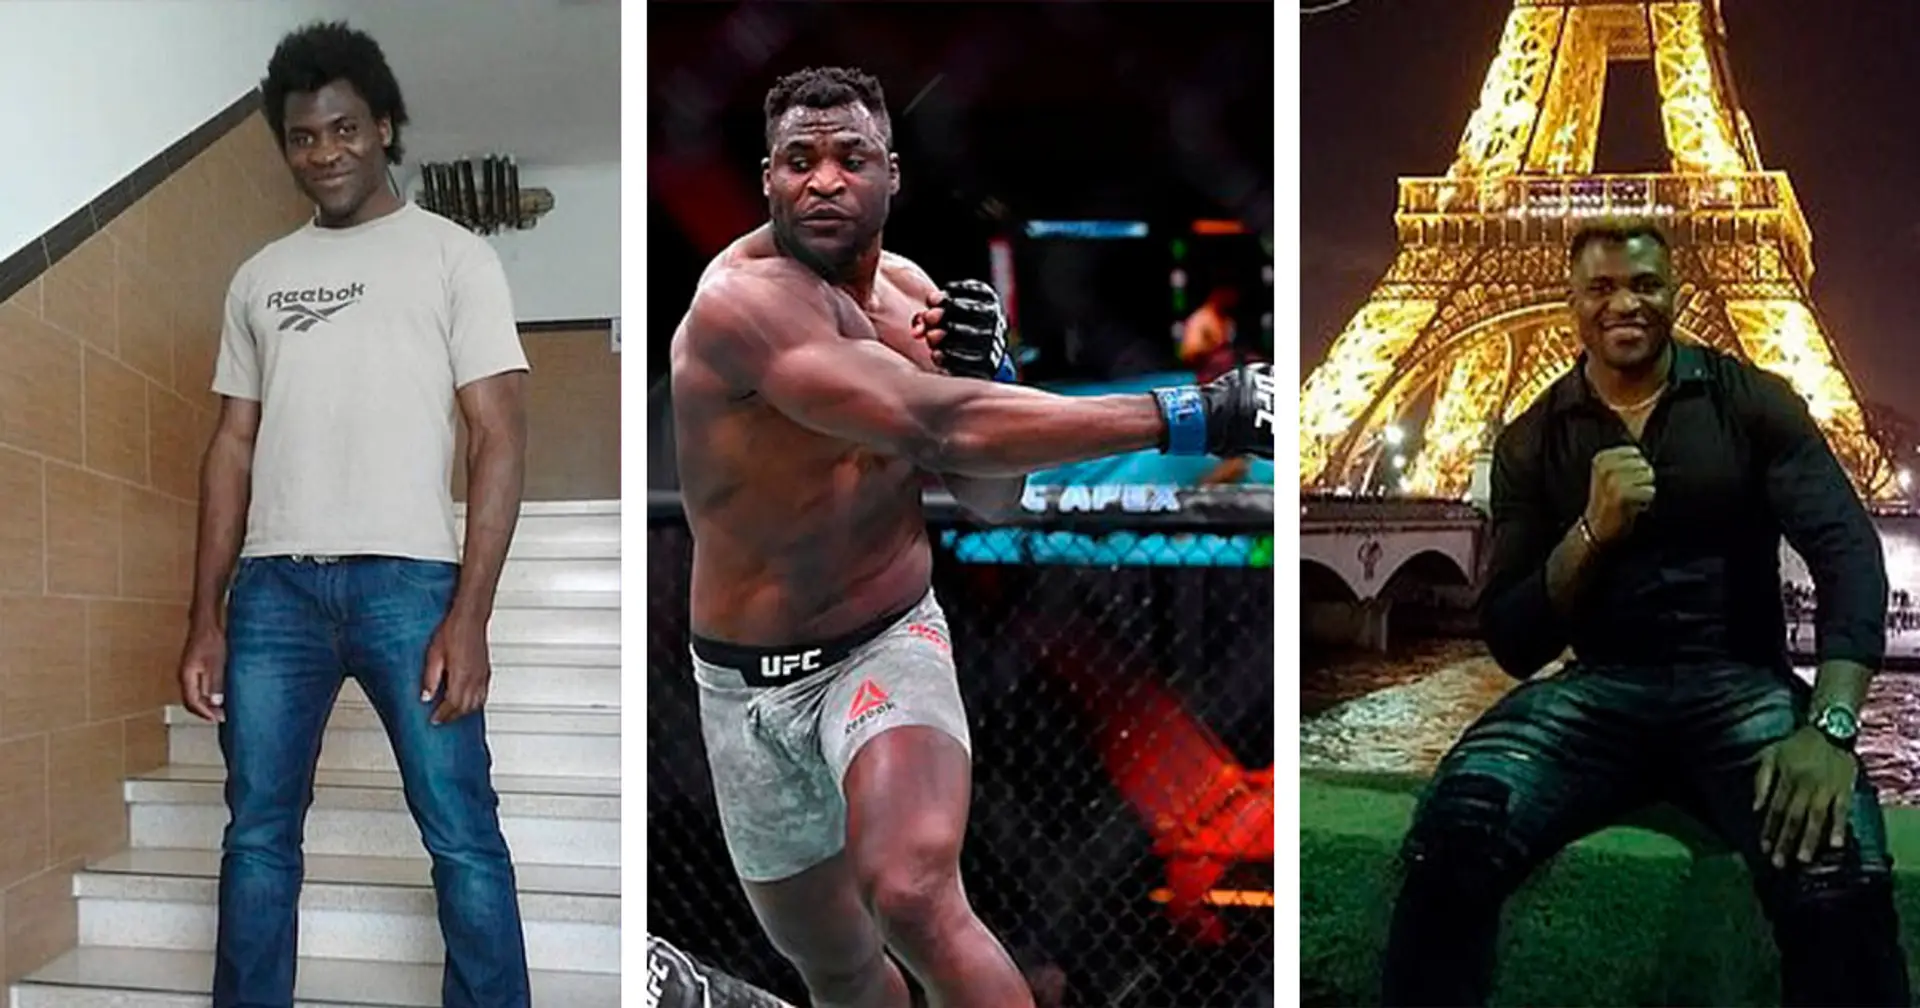 Fighting with rats, traveling with smugglers and 14-month journey to Europe: unknown Francis Ngannou